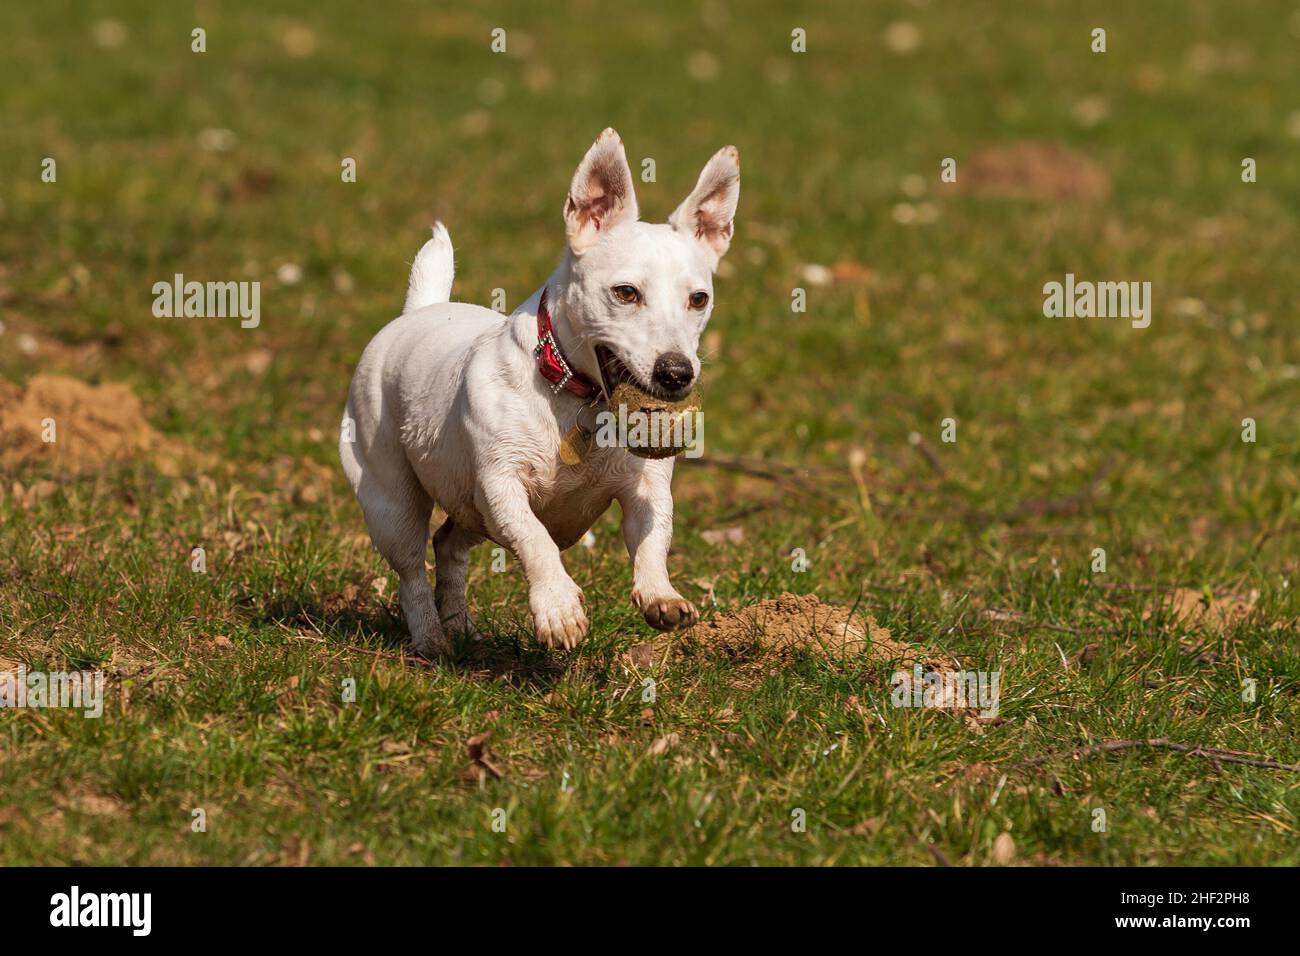 A small white dog runs across a meadow and has a balloon in his mouth. Stock Photo